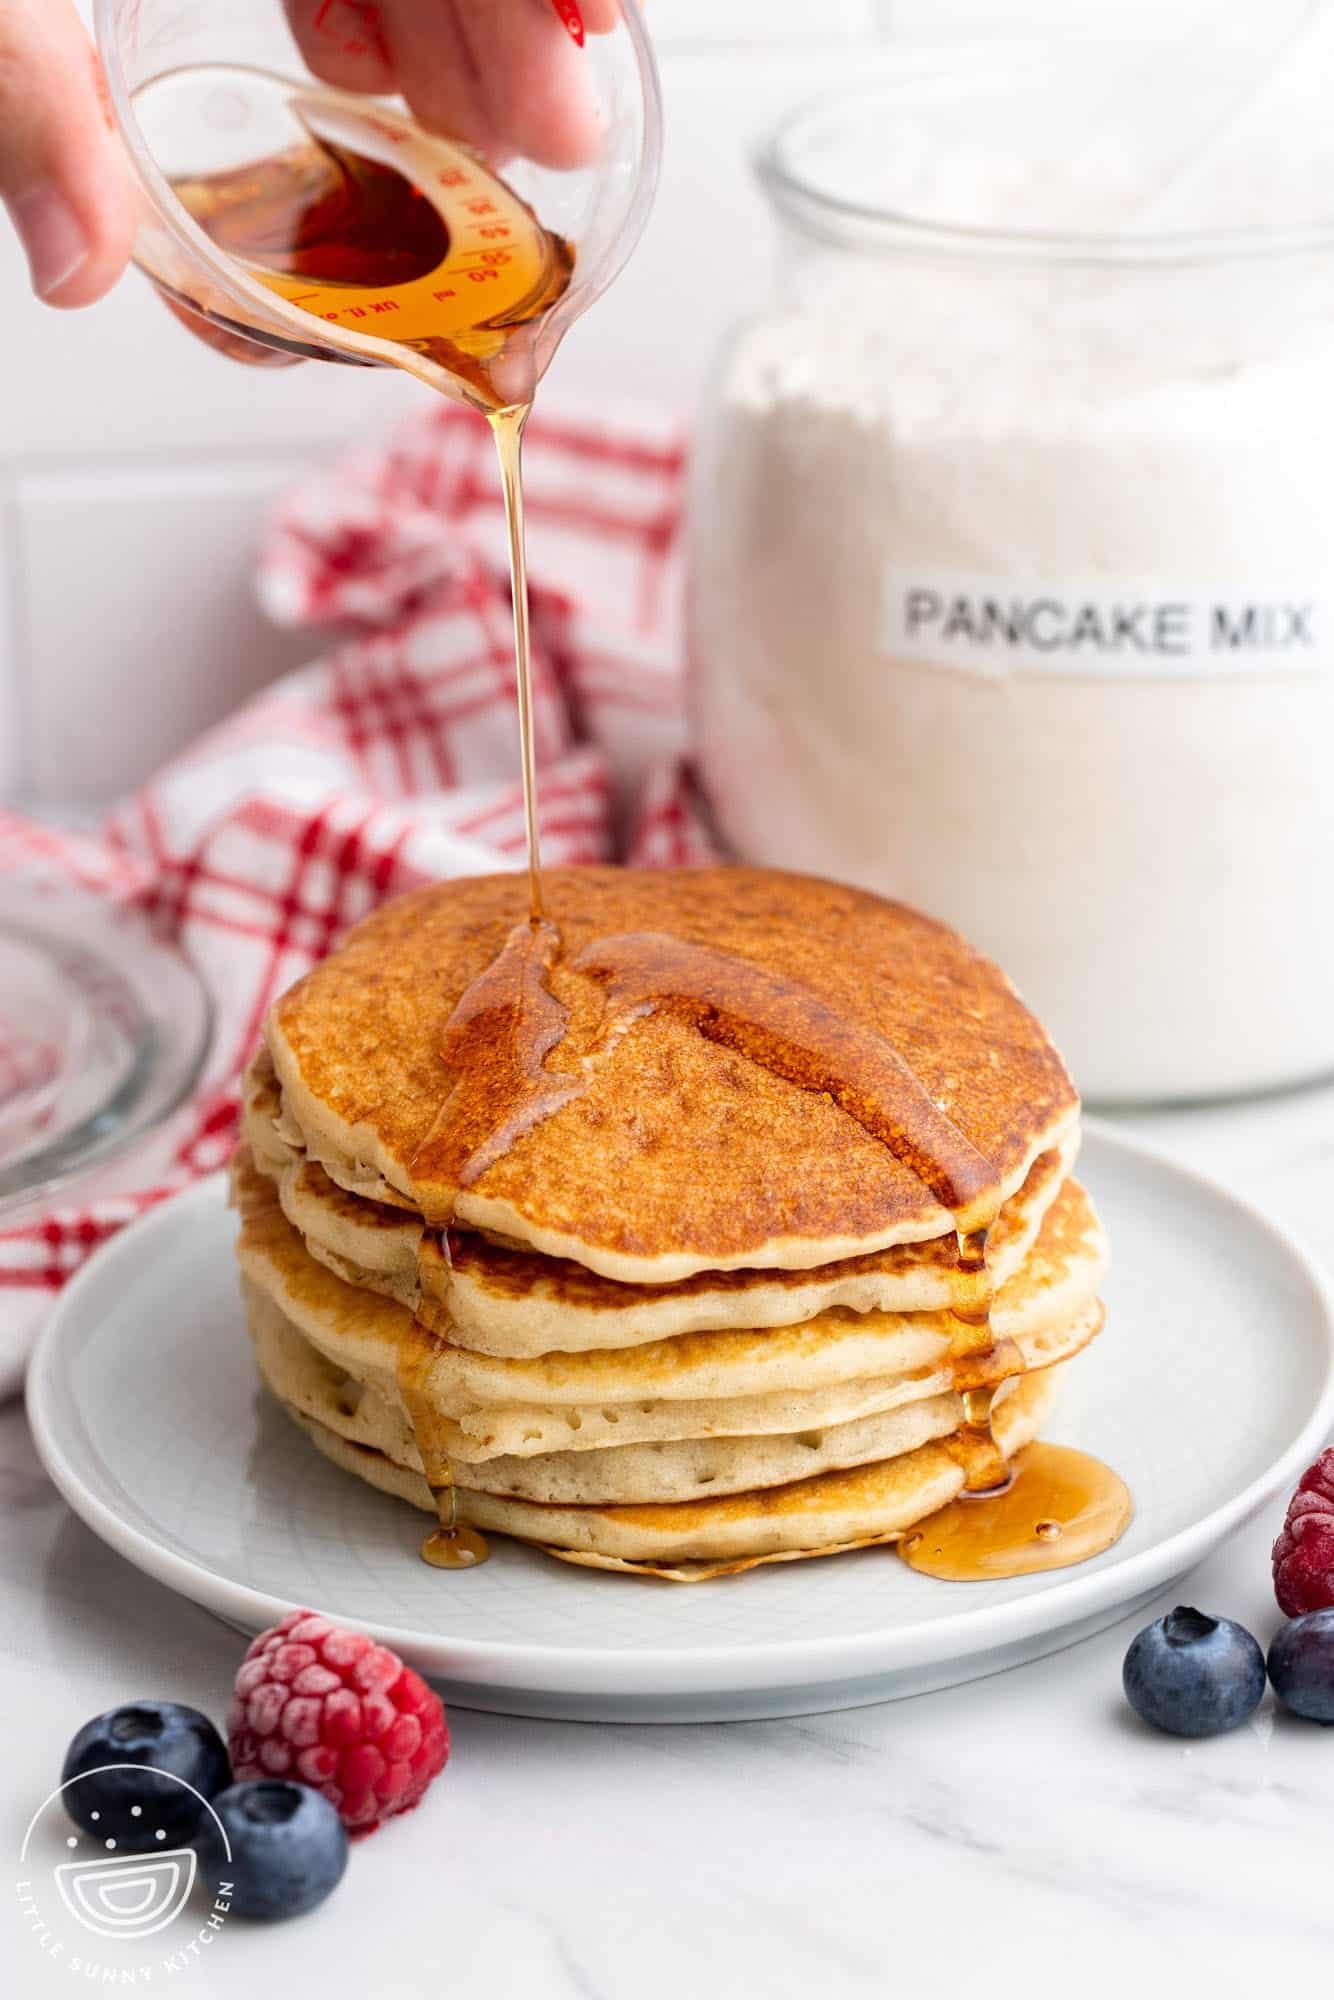 A stack of homemade pancakes on a plate with syrup. In the background is a jar of homemade pancake mix.